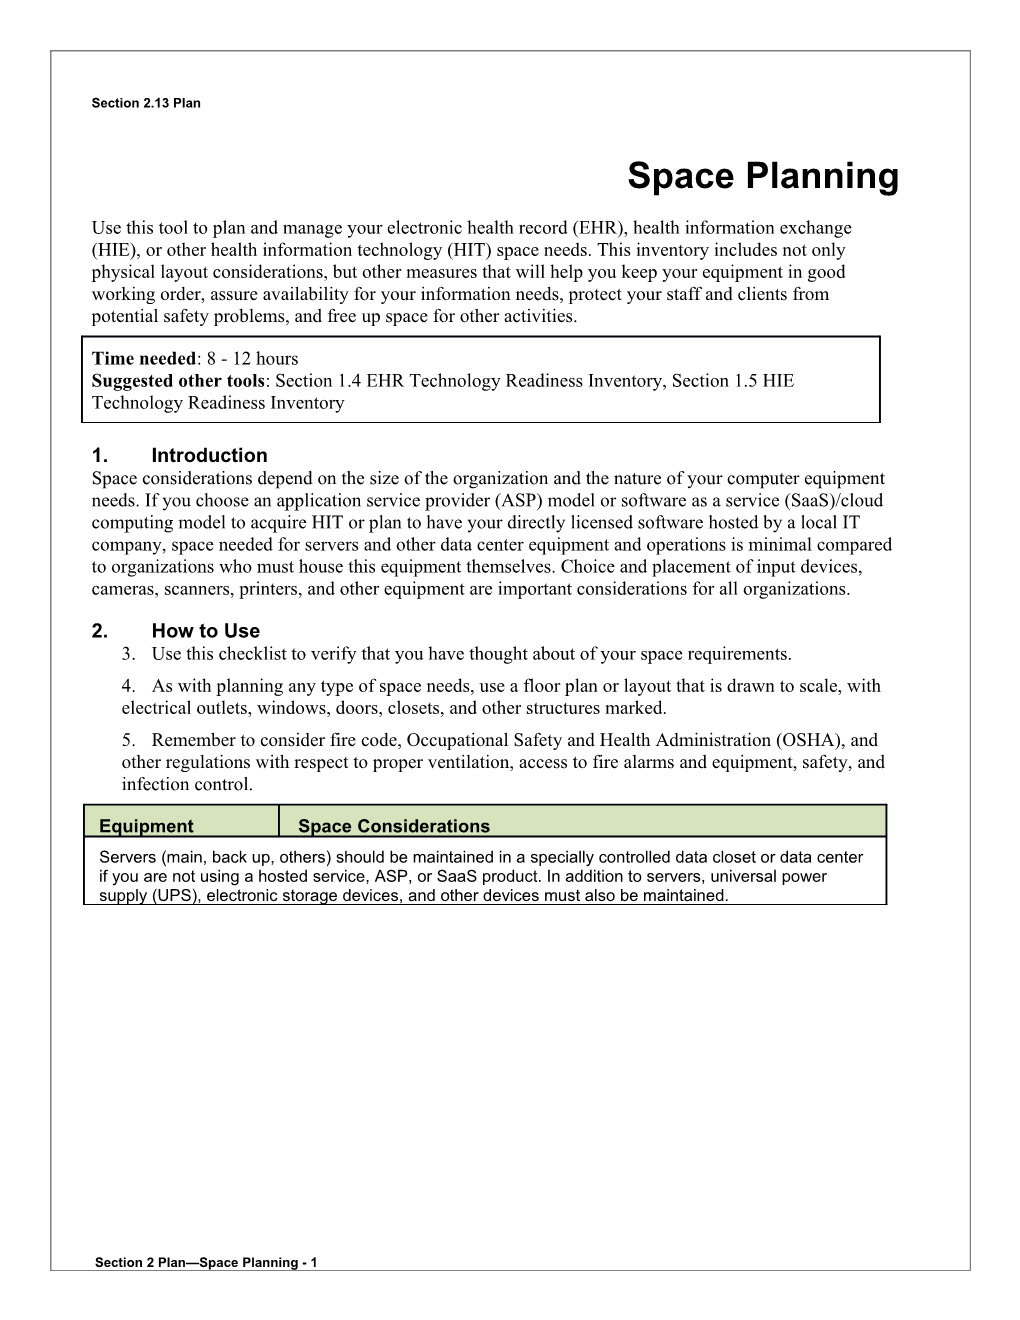 Section 2 Plan Space Planning - 1 s1